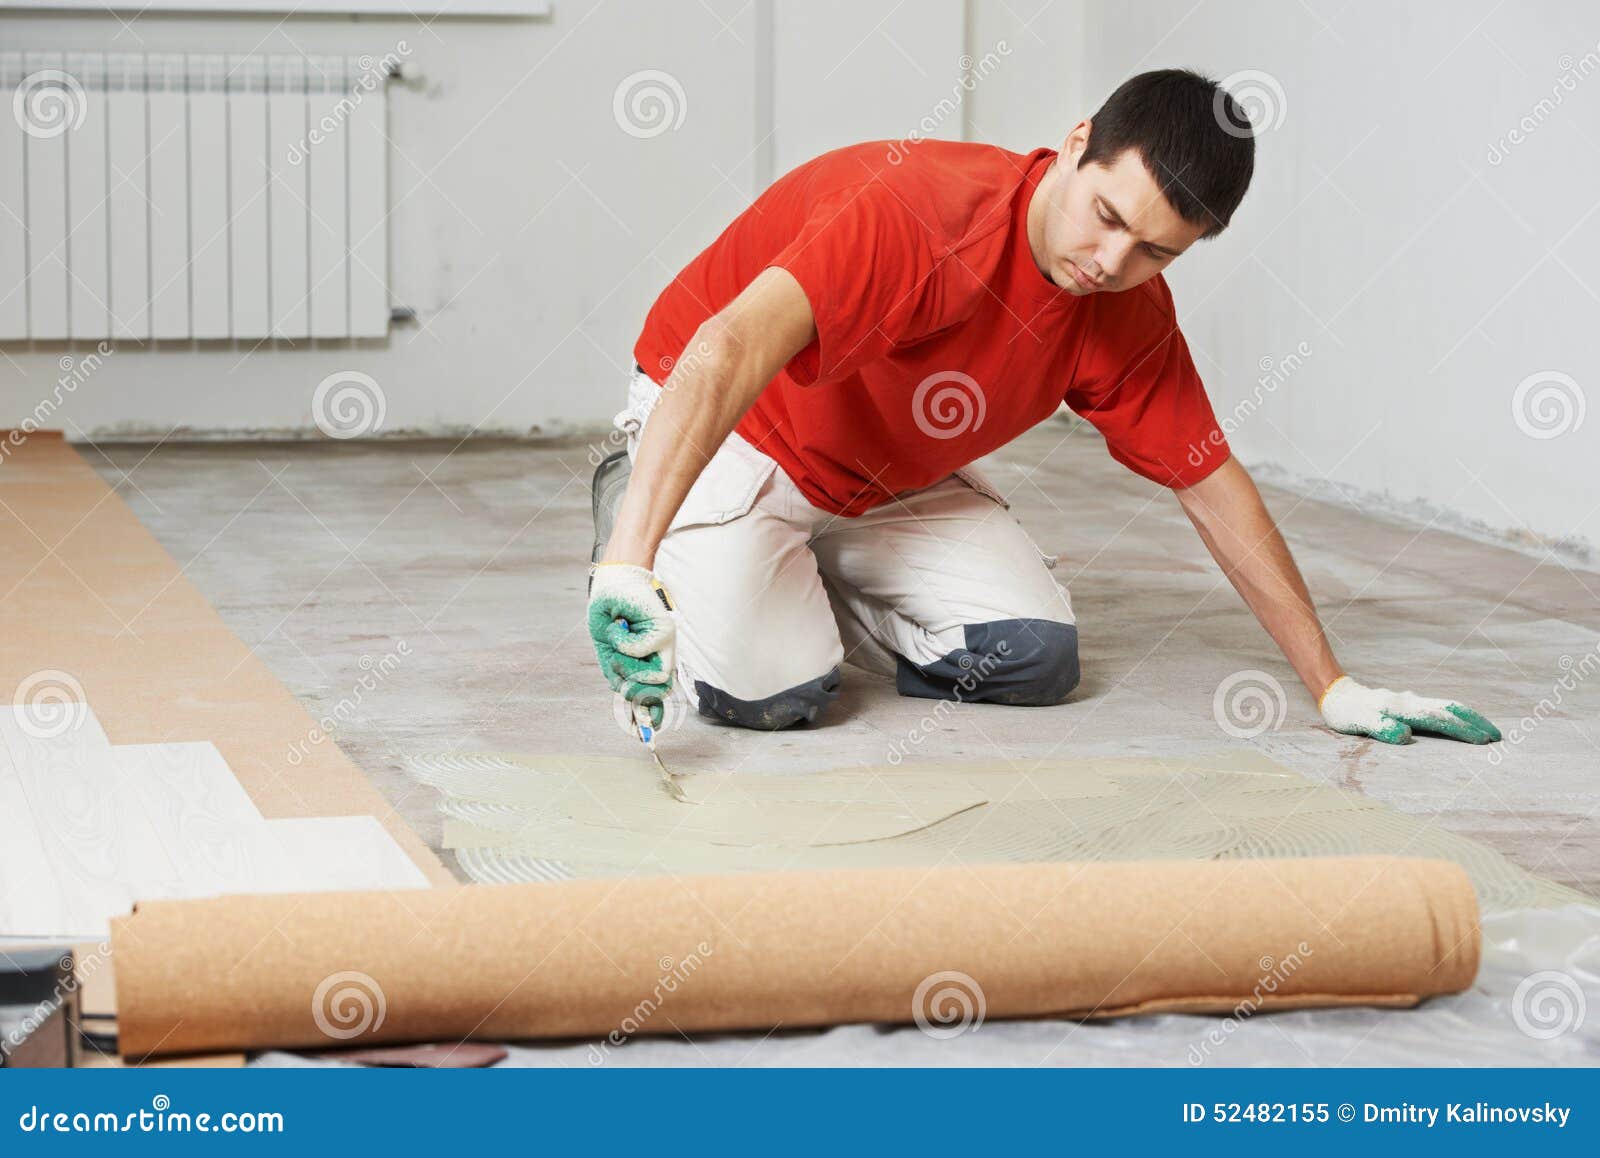 Parquet Floor Work With Stock Image Image Of Decorating 52482155